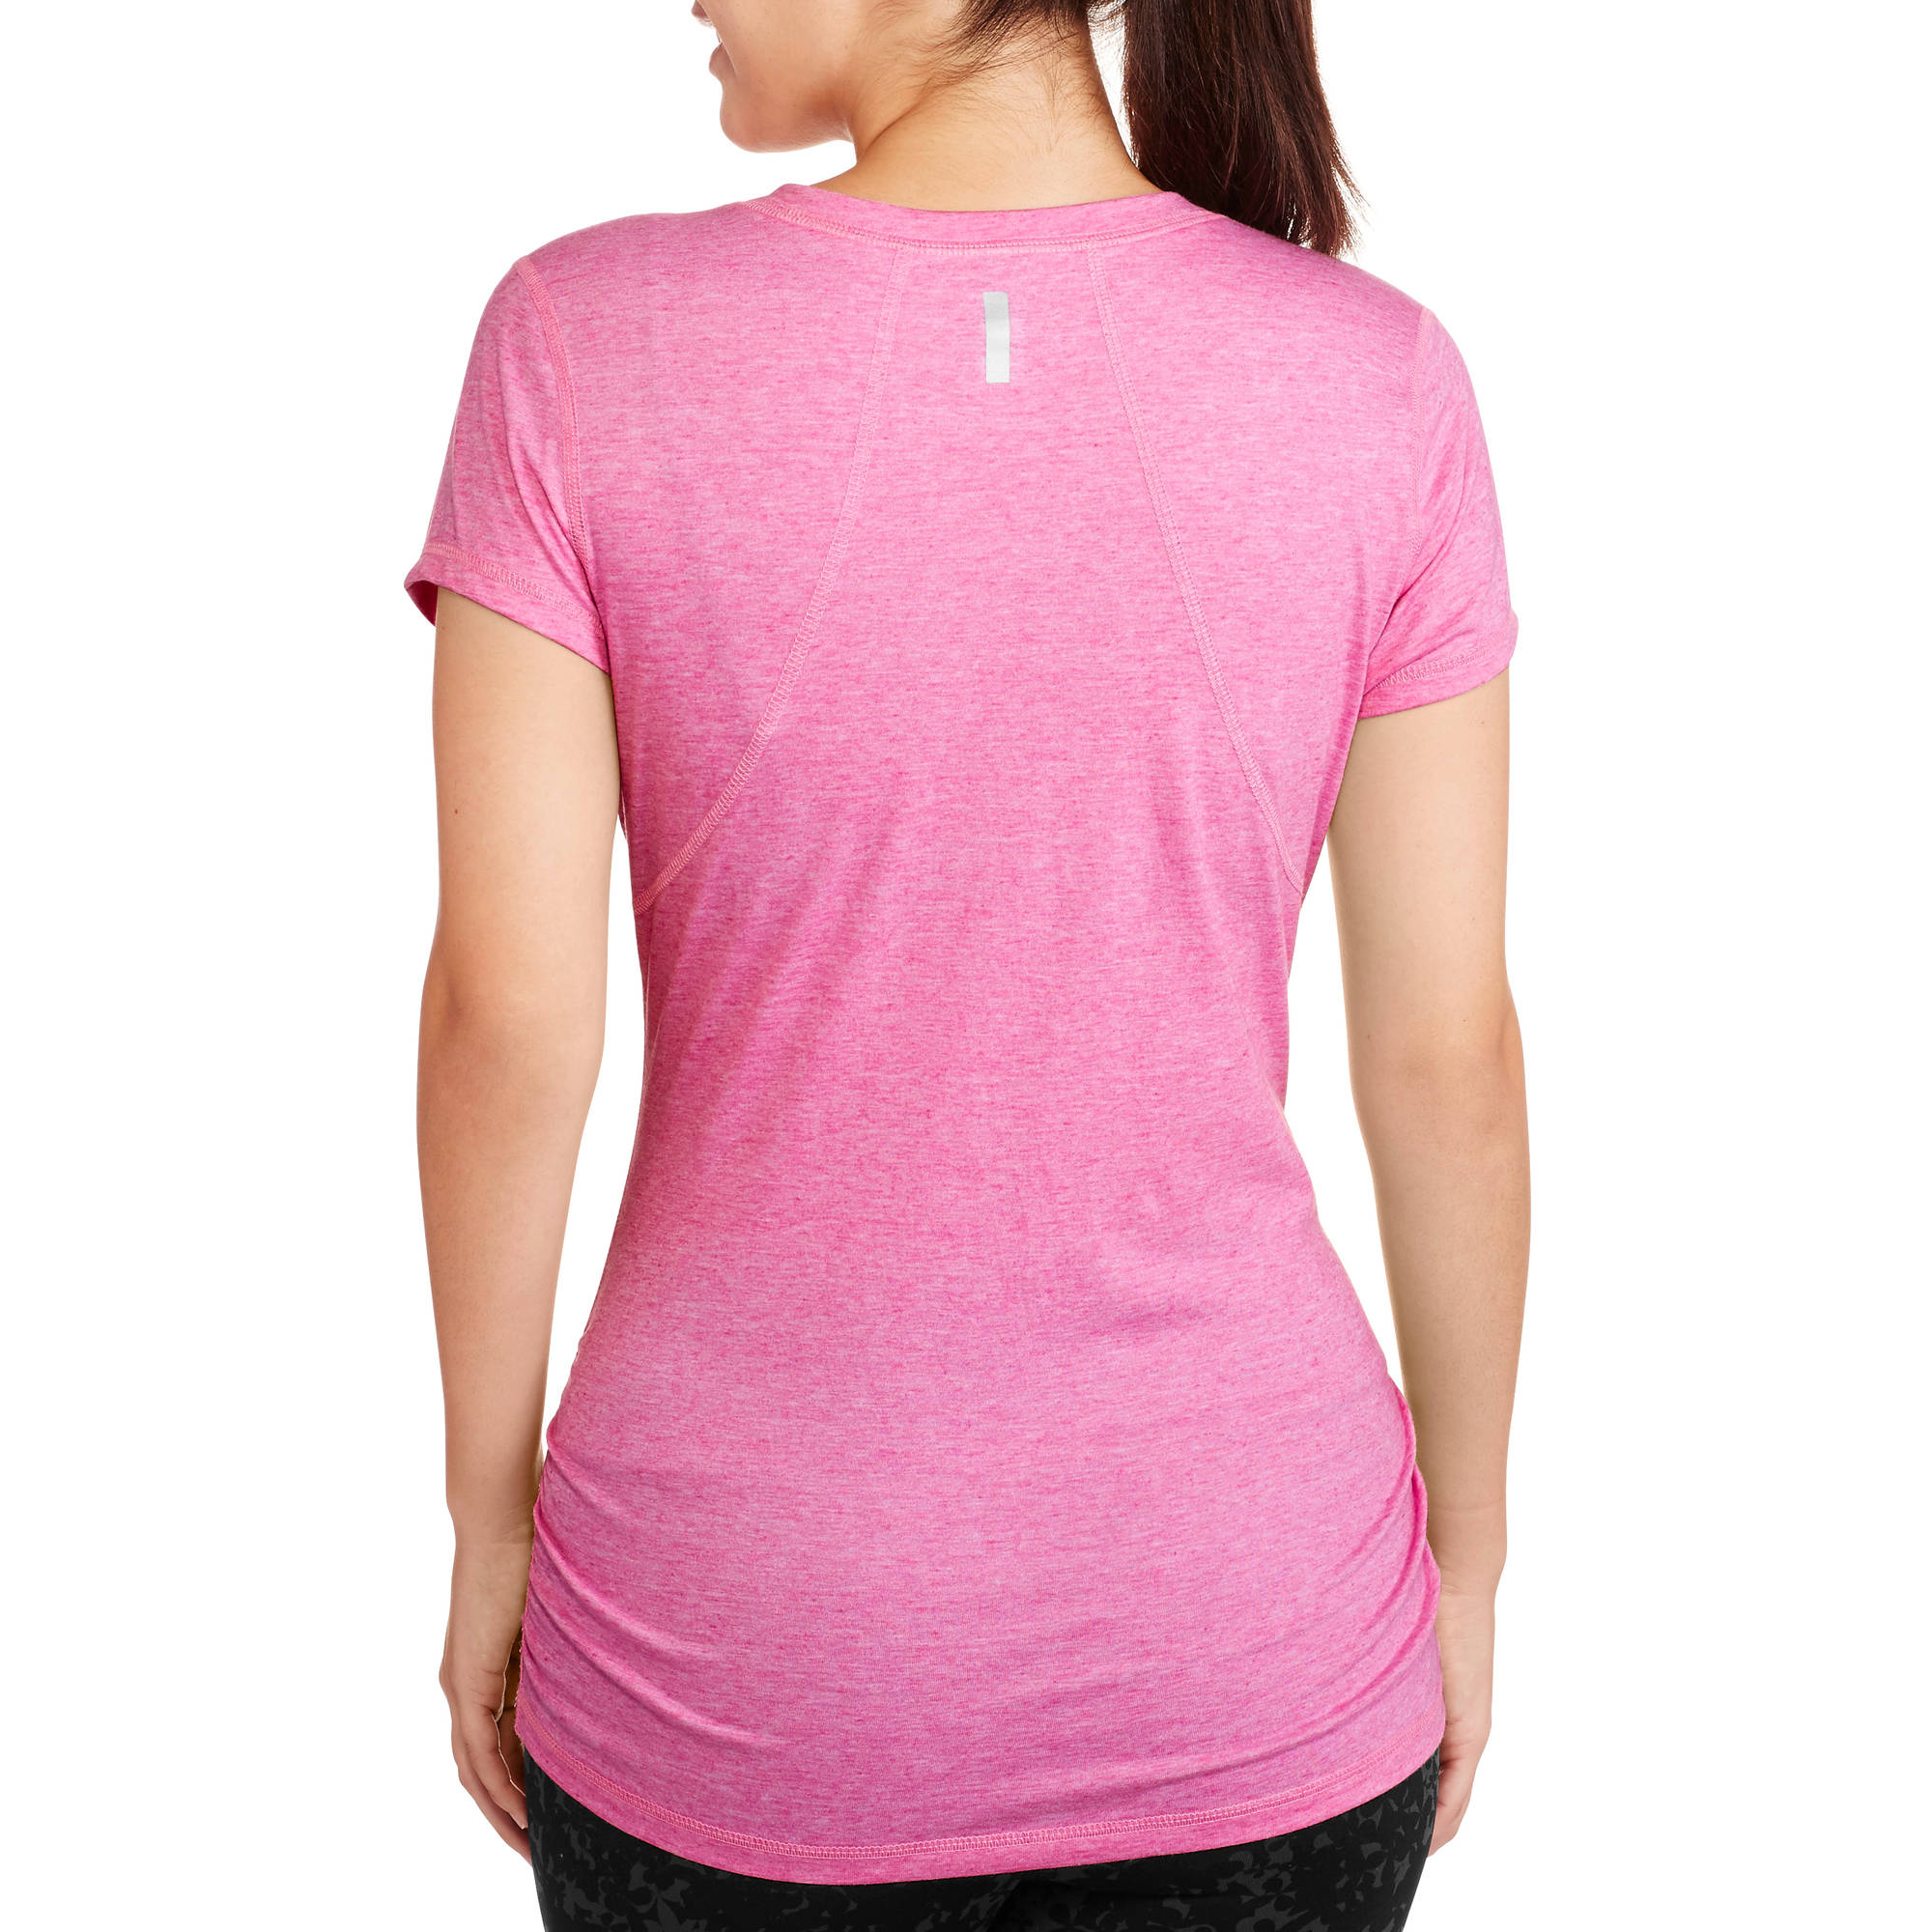 Women's Essential Active T-Shirt - image 2 of 2